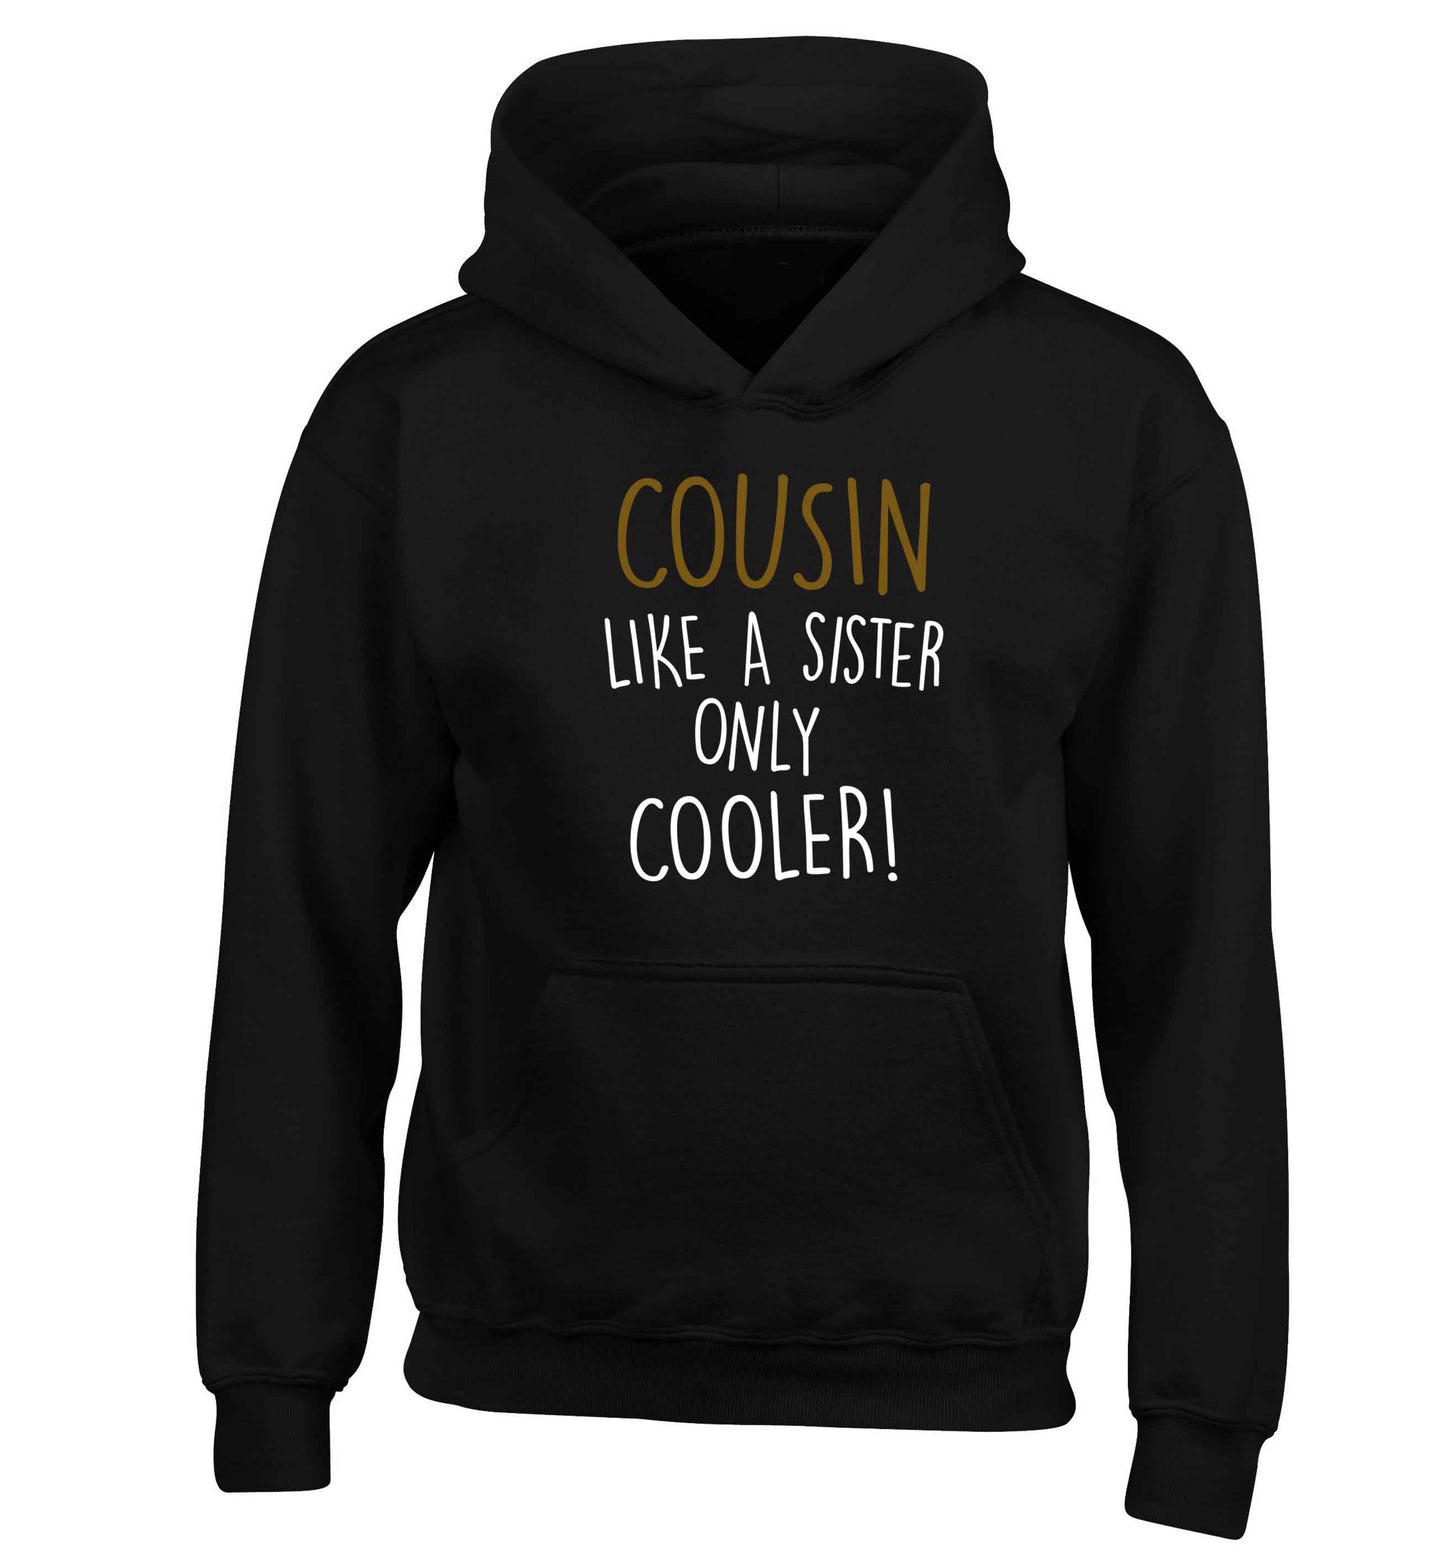 Cousin like a sister only cooler children's black hoodie 12-13 Years